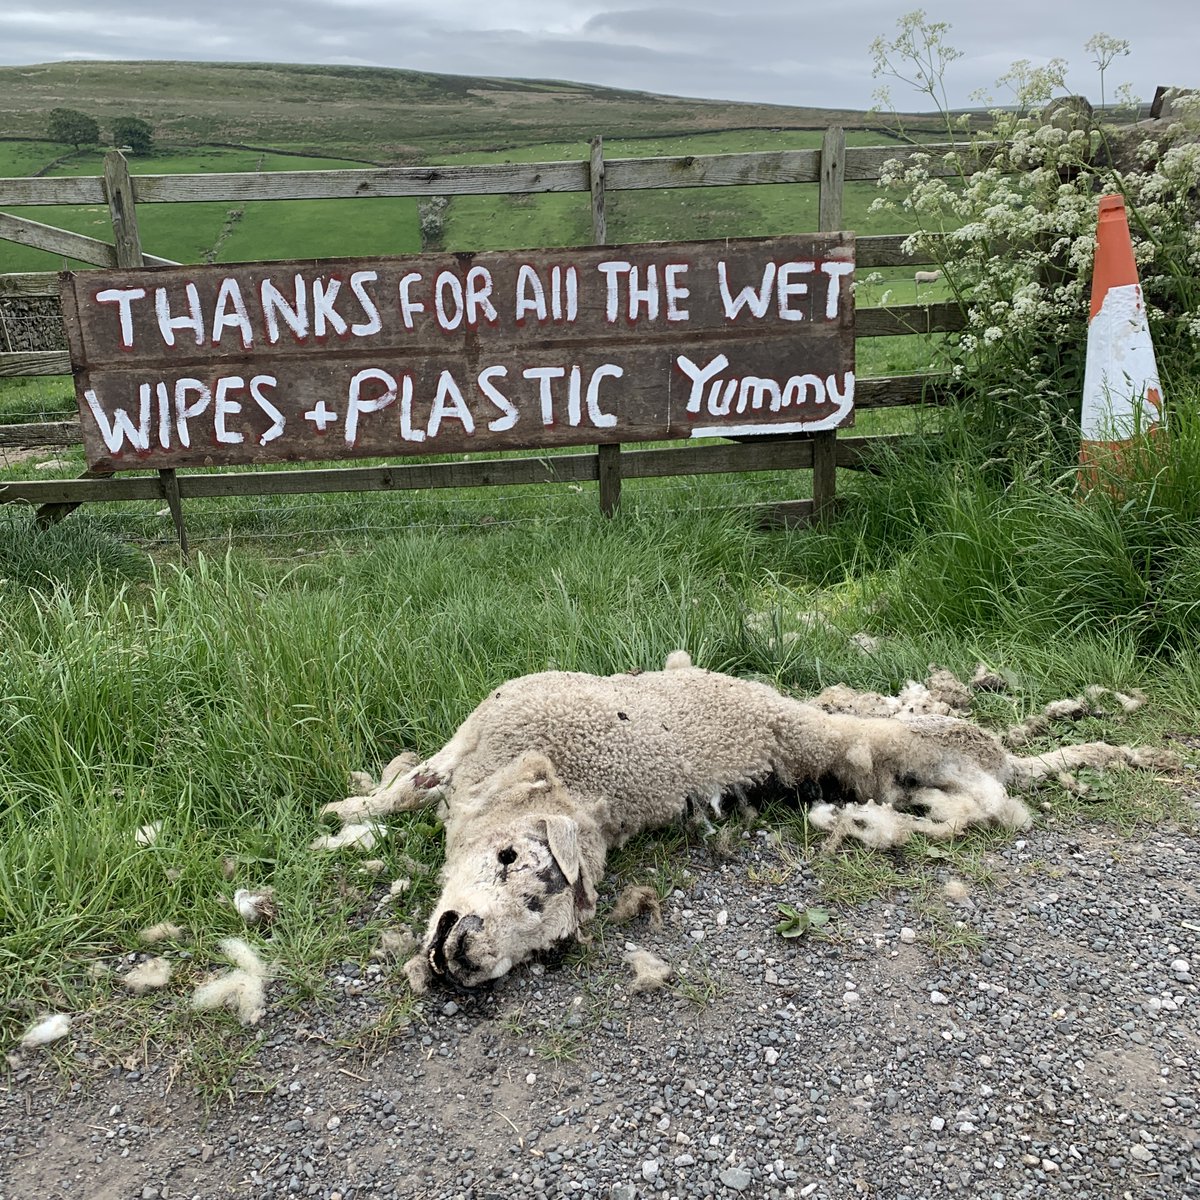 Sorry about this horrible photo.  Our neighbours are hill farmers.
This is what happens when visitors to the moors outside Haworth drop litter.  Take your rubbish home. 
#litter #brontecountry #countrysidecode